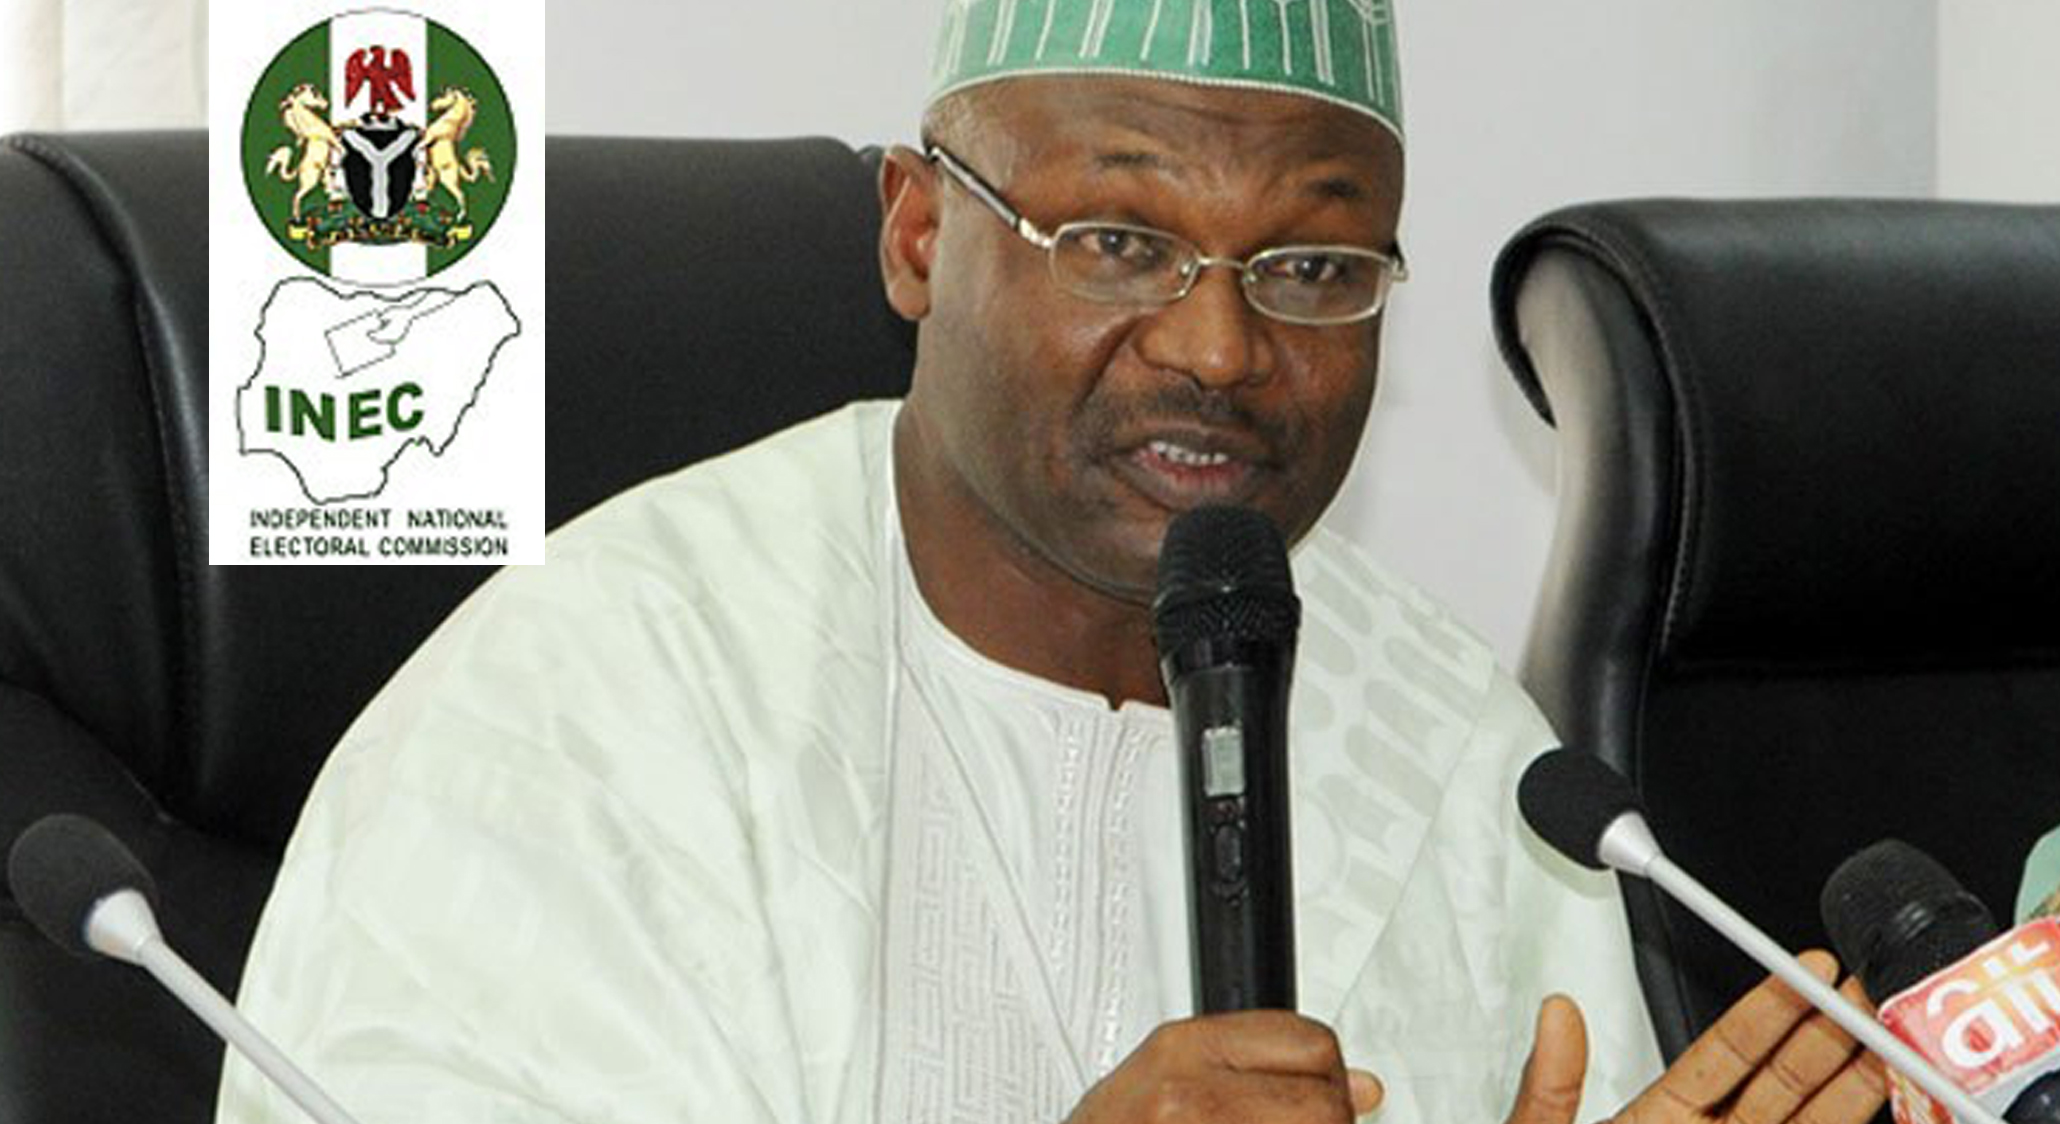  Electoral reform: the era of manual election in Nigeria is over – INEC